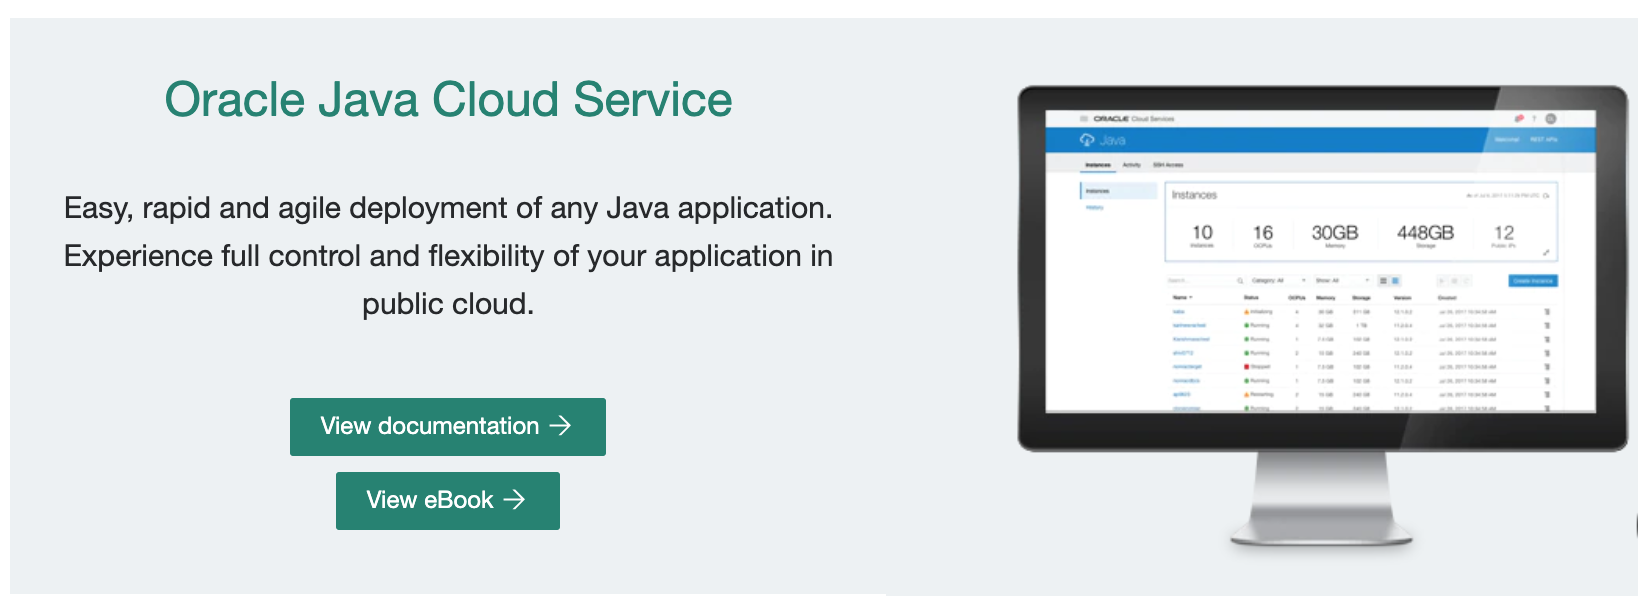 Java Cloud Service is the ideal solution for environments with higher availability needs, including development, production, staging, and user acceptance training.